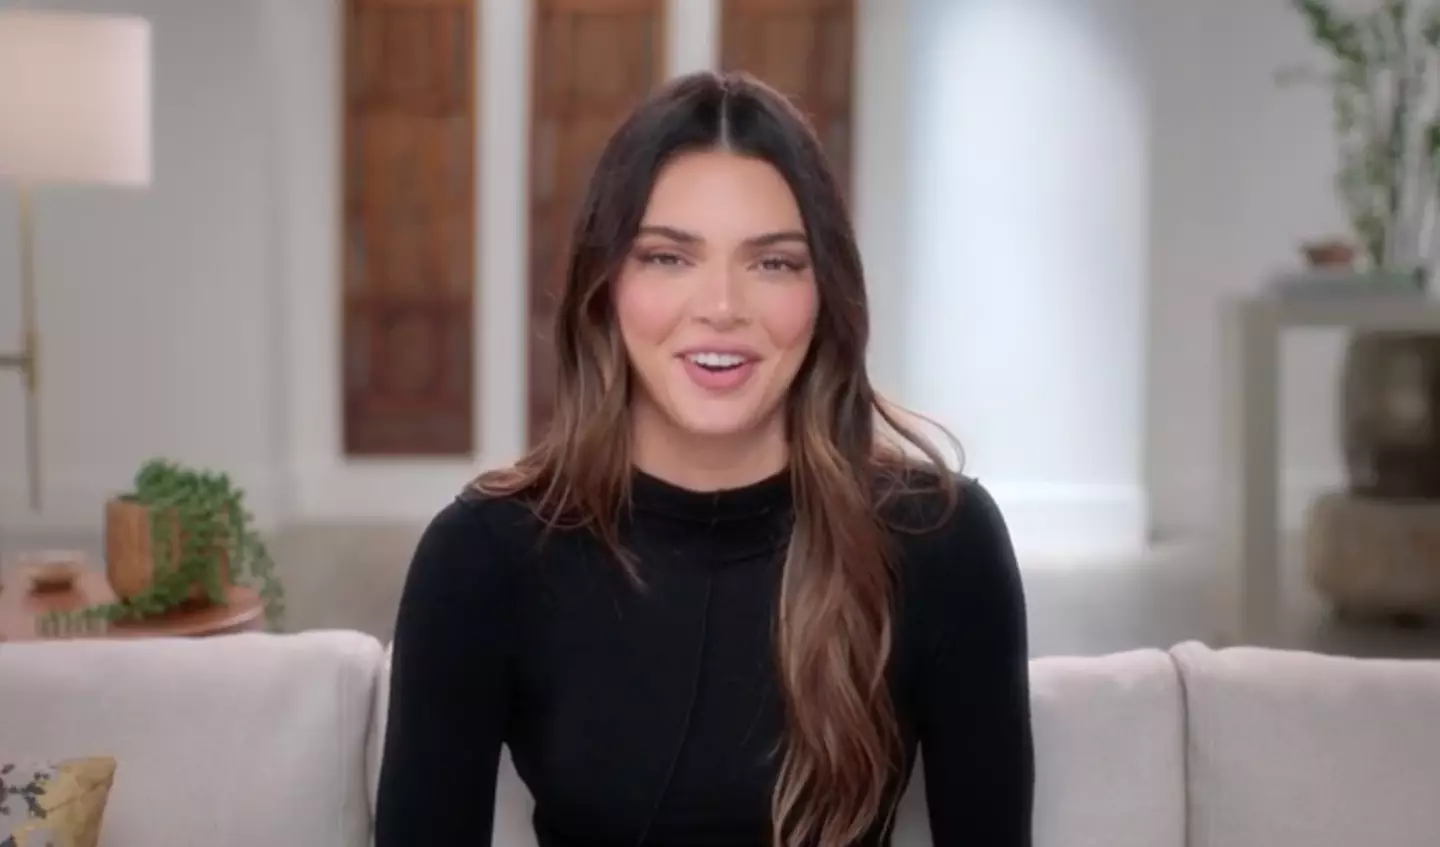 Kendall Jenner opens up about being single on the new series of The Kardashians.